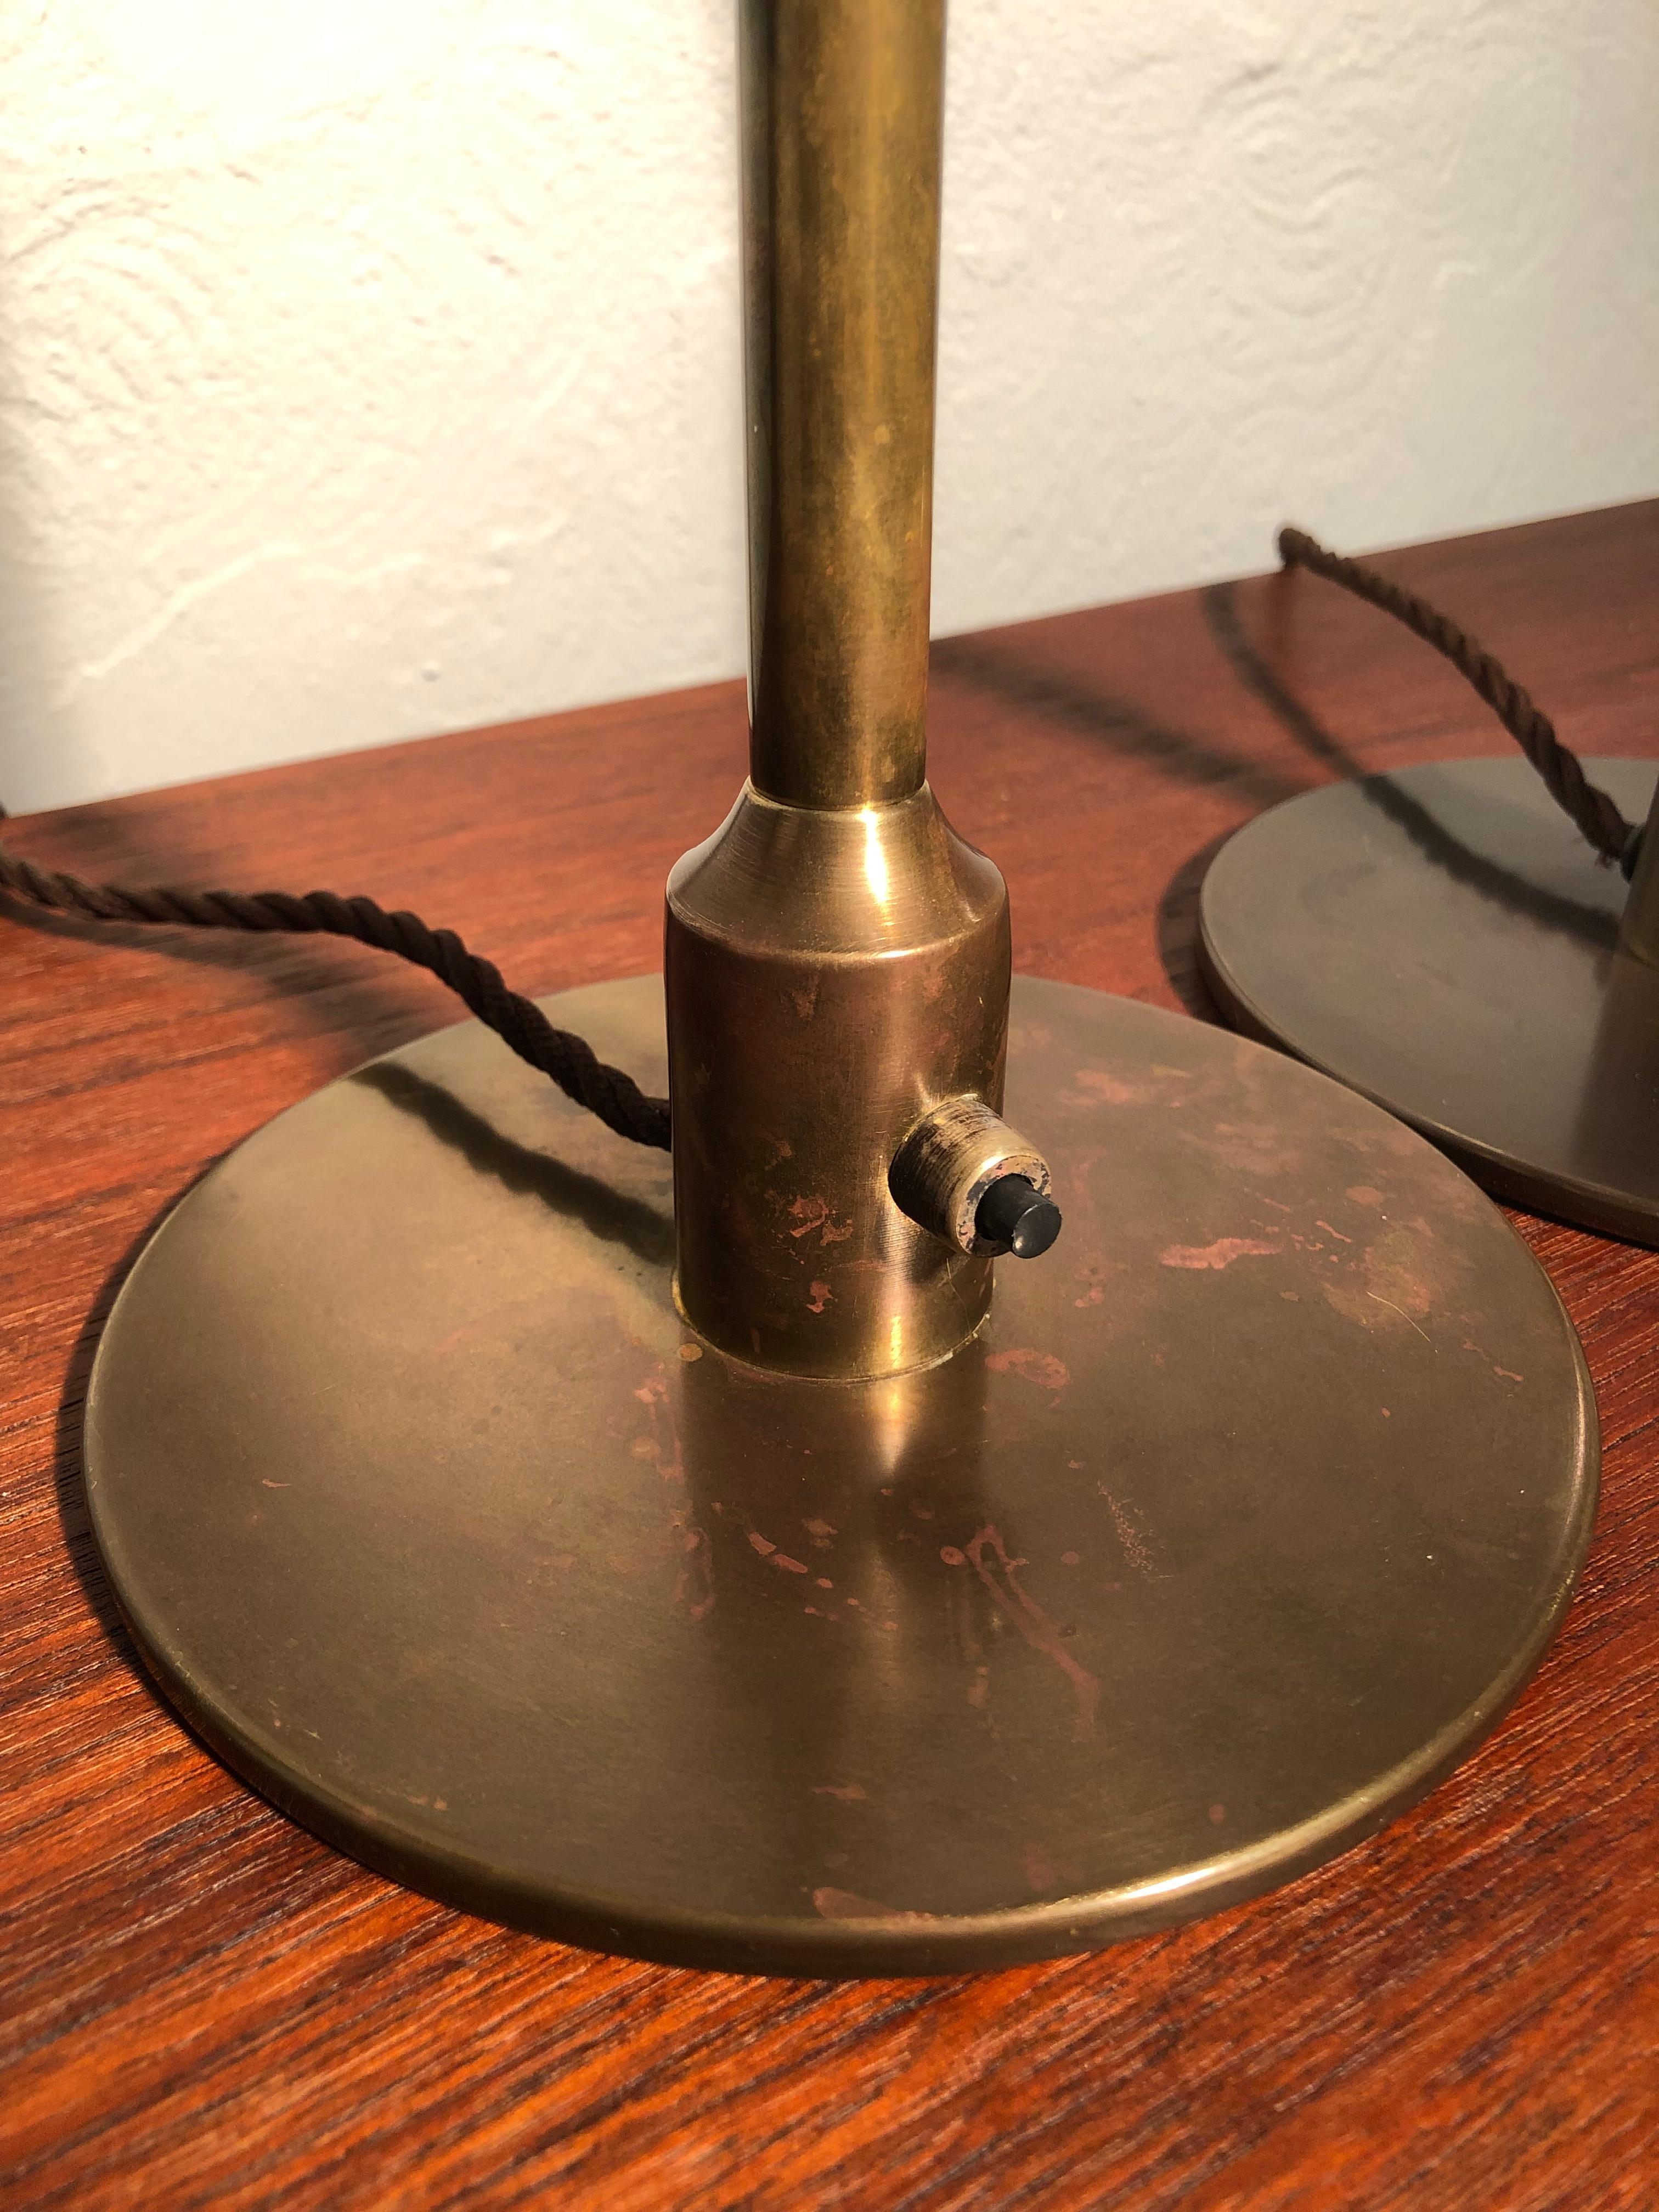 Pair of Vintage Brass Table Lamps by Fog & Mørup Lamp Makers from the 1940s For Sale 6